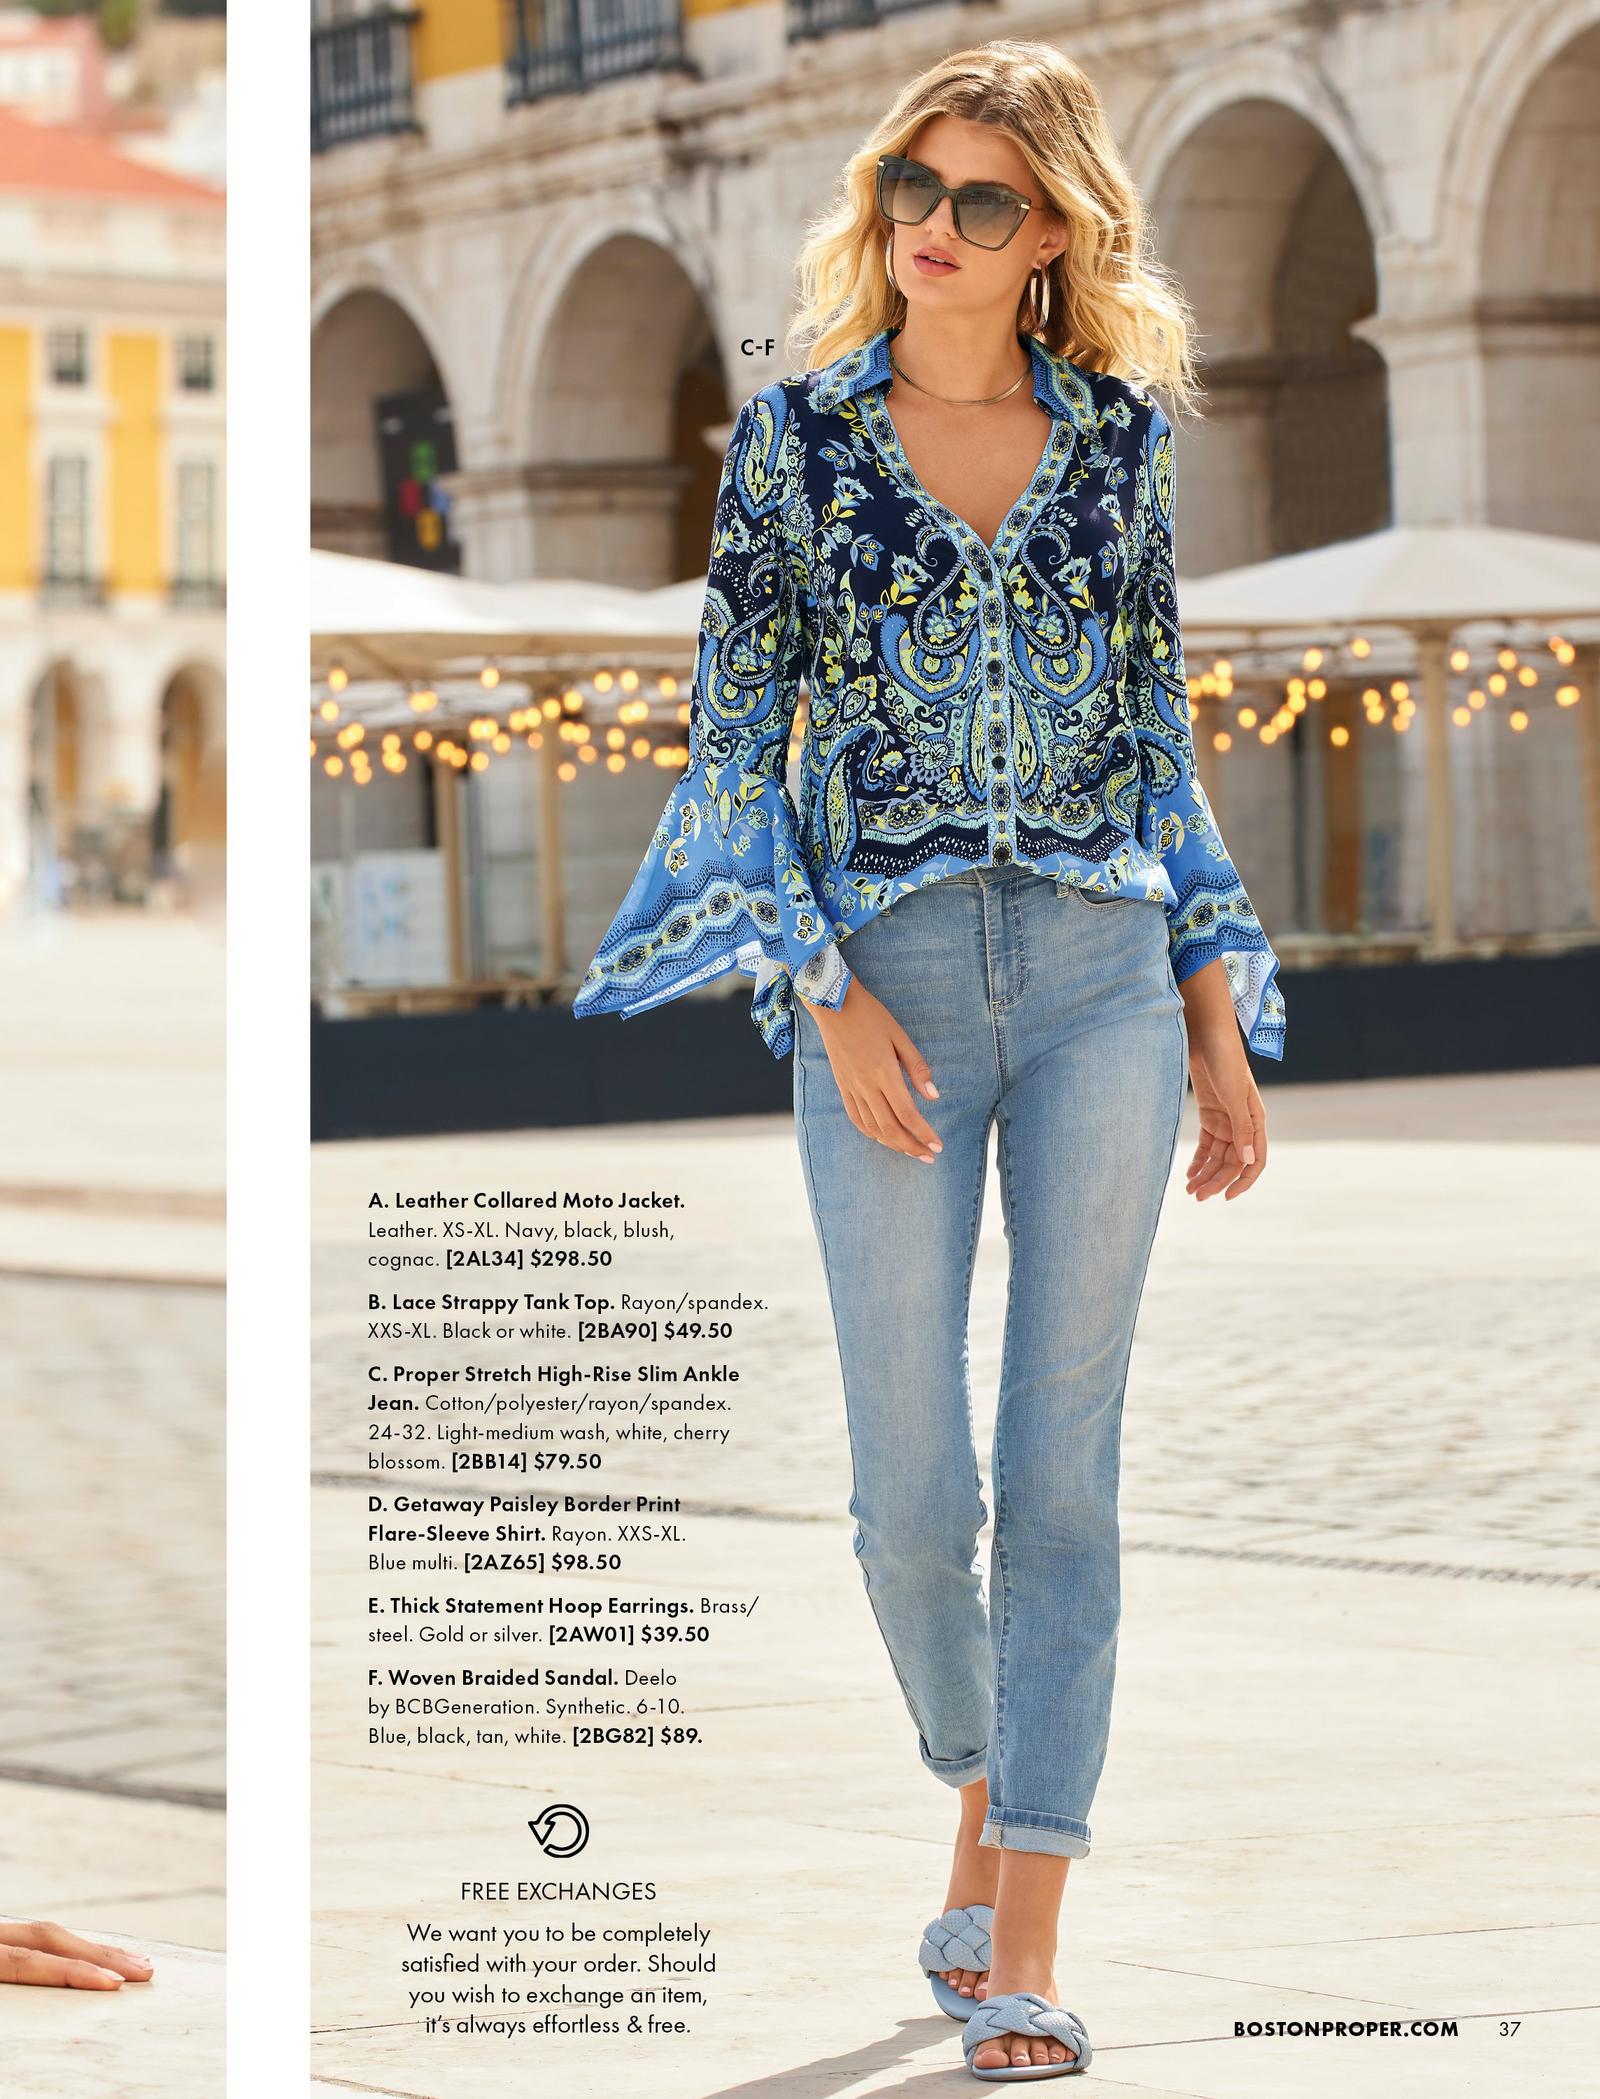 model wearing blue paisley printed flare-sleeve shirt, silver hoop earrings, light wash jeans, blue braided sandals, and sunglasses.